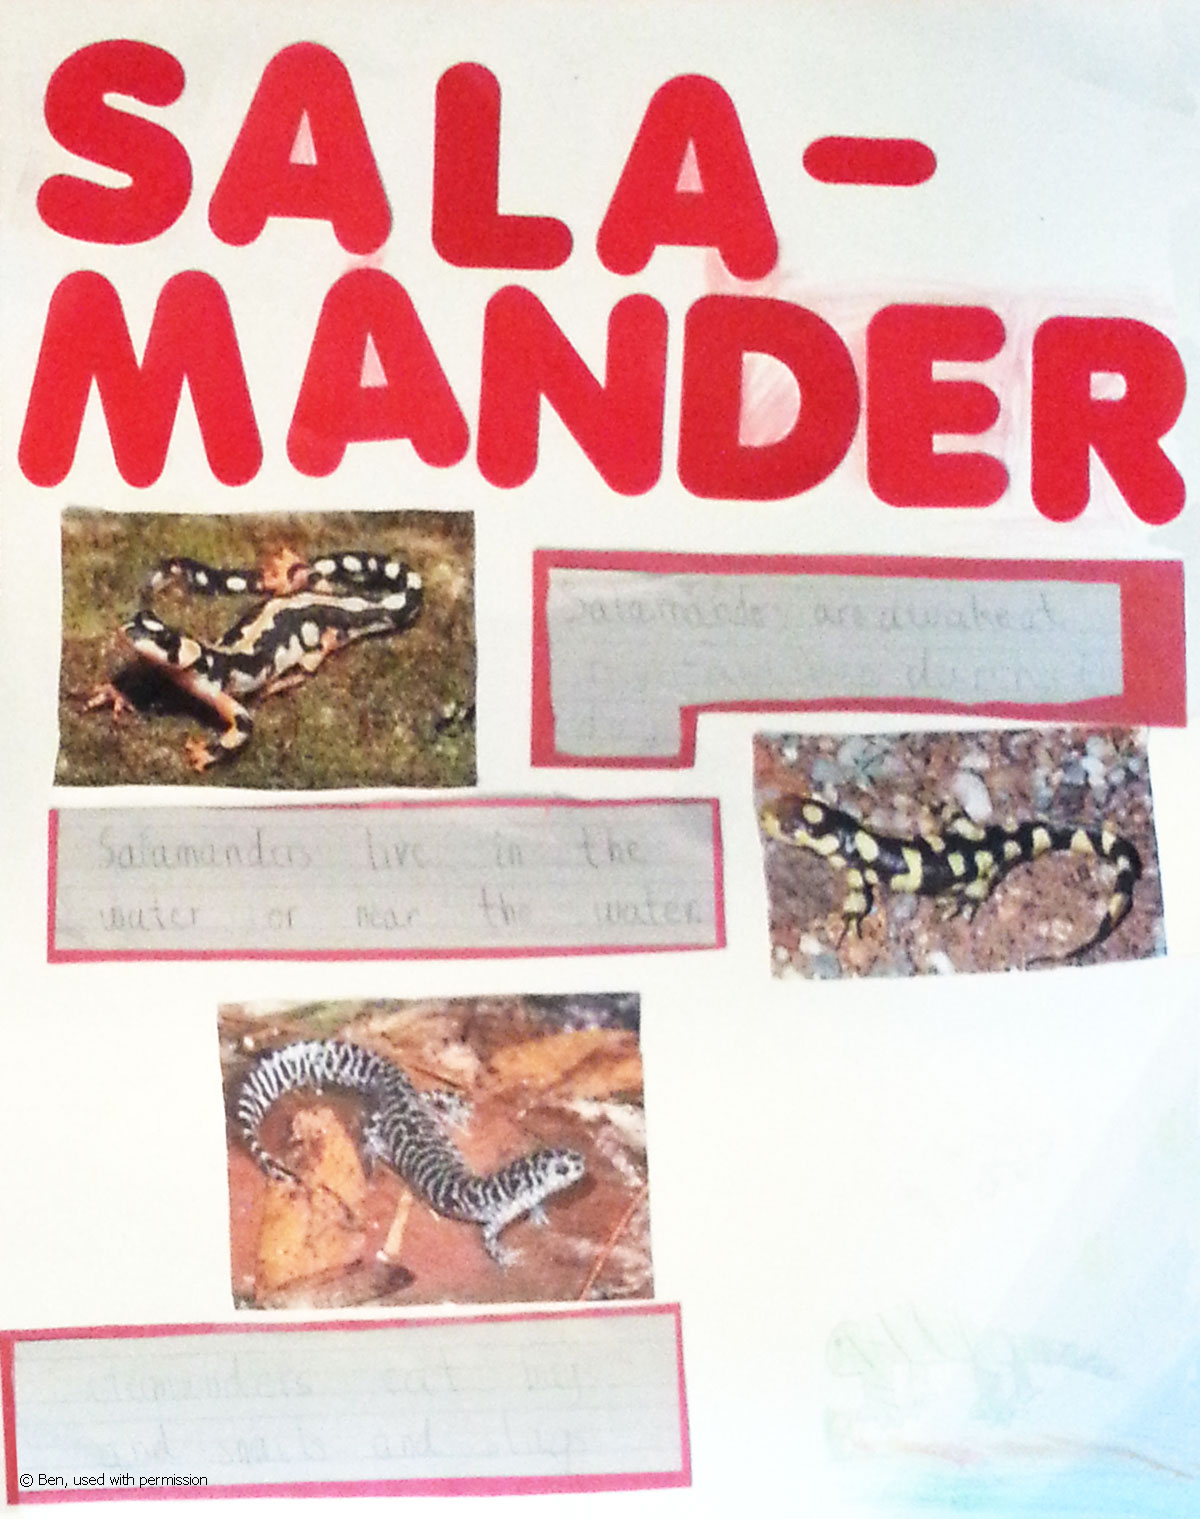 poster with salamander images and facts